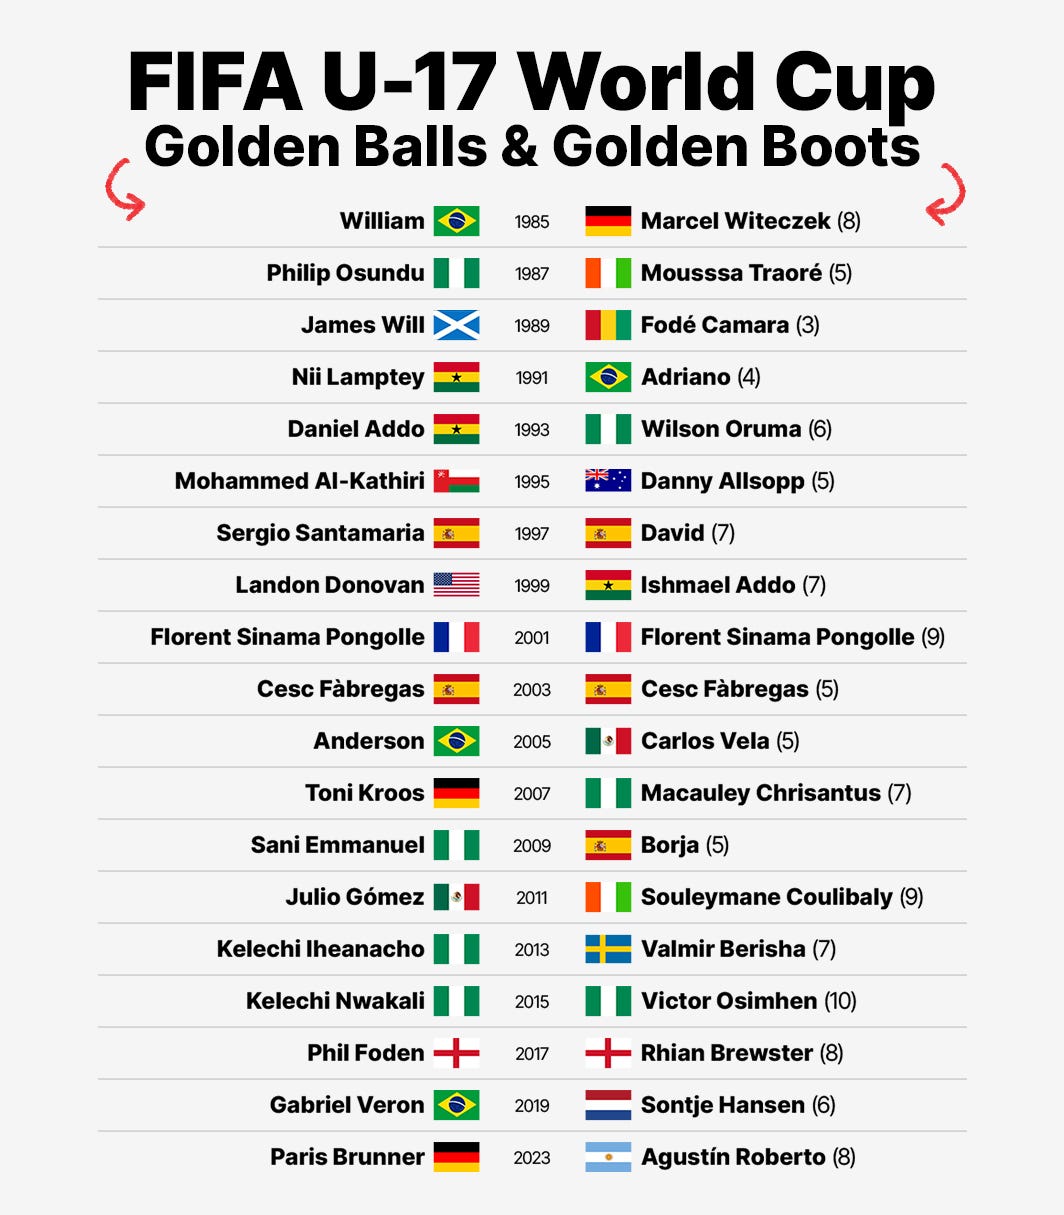 A list featyring the Golden Ball and Golden Boot winners from every men's FIFA U-17 World Cup